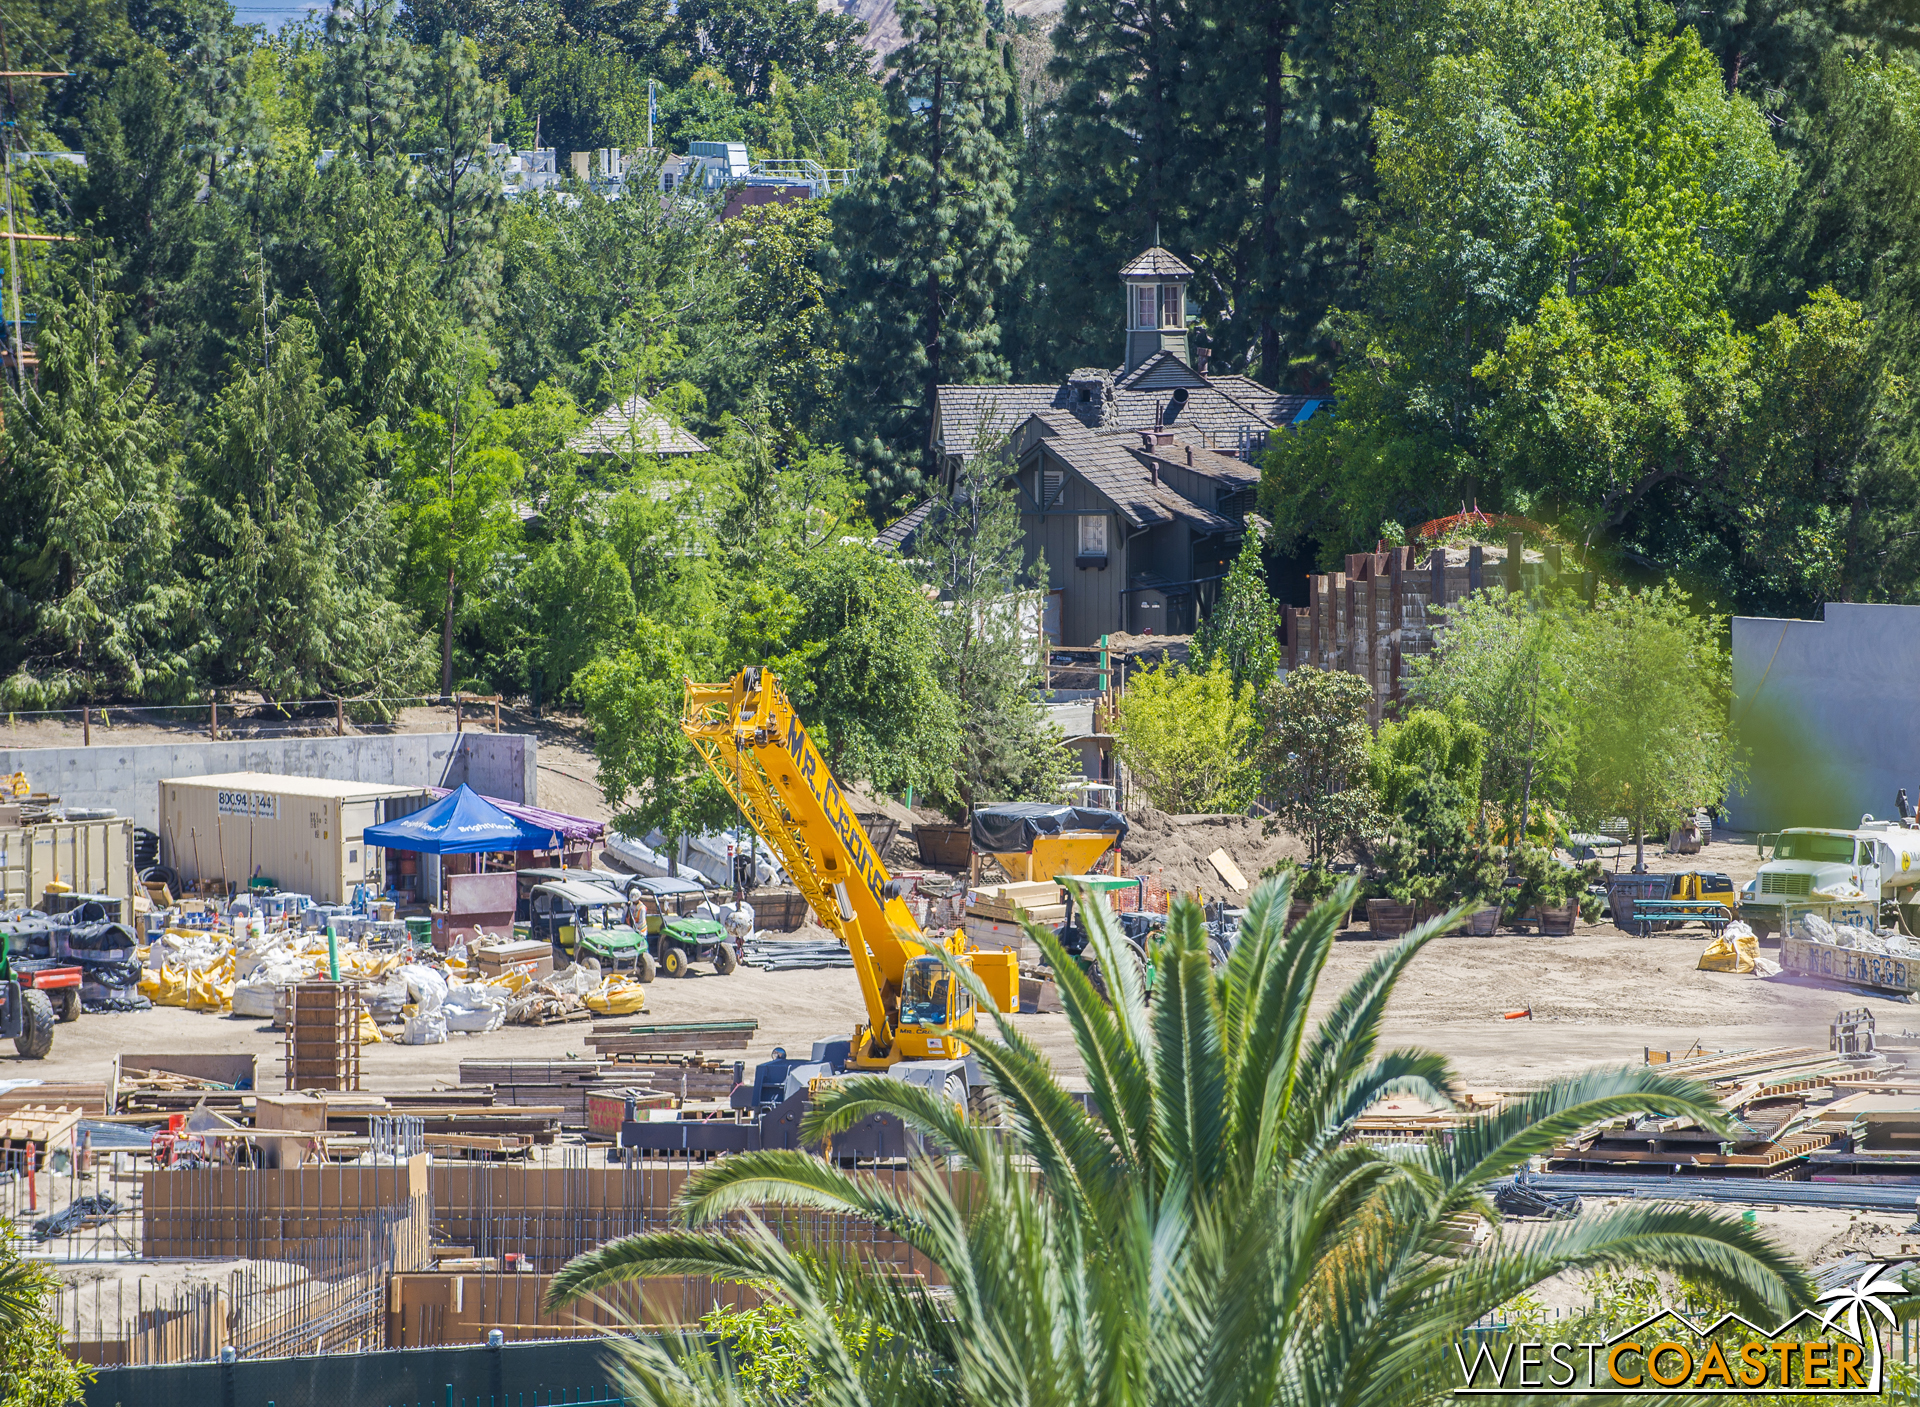  It will be interesting to see how the Rivers of America progress, and if a lot of finishing work happens in a short amount of time. 